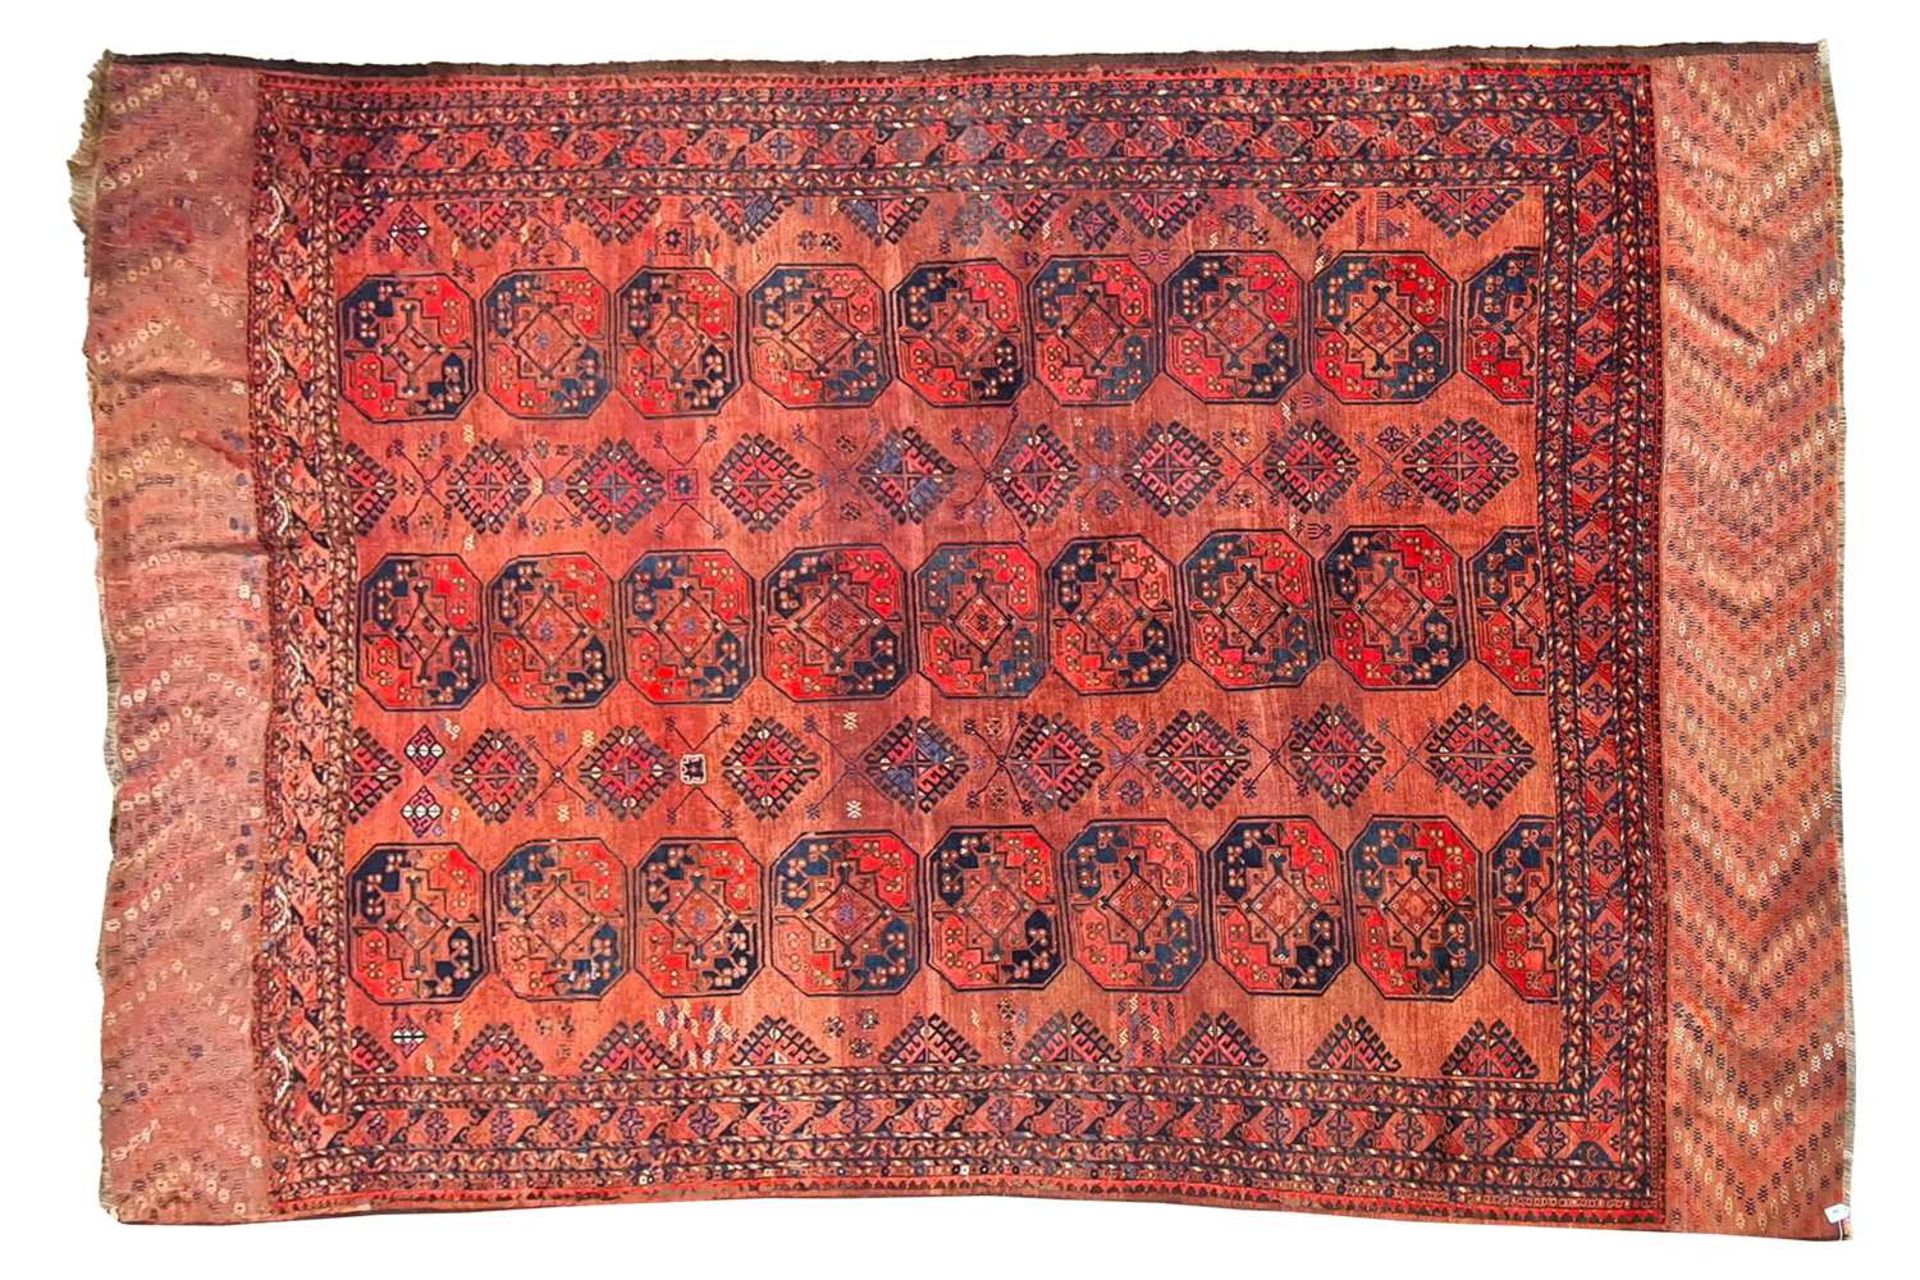 A large antique "Old country house" red ground Afghan carpet, with three rows of elephant foot